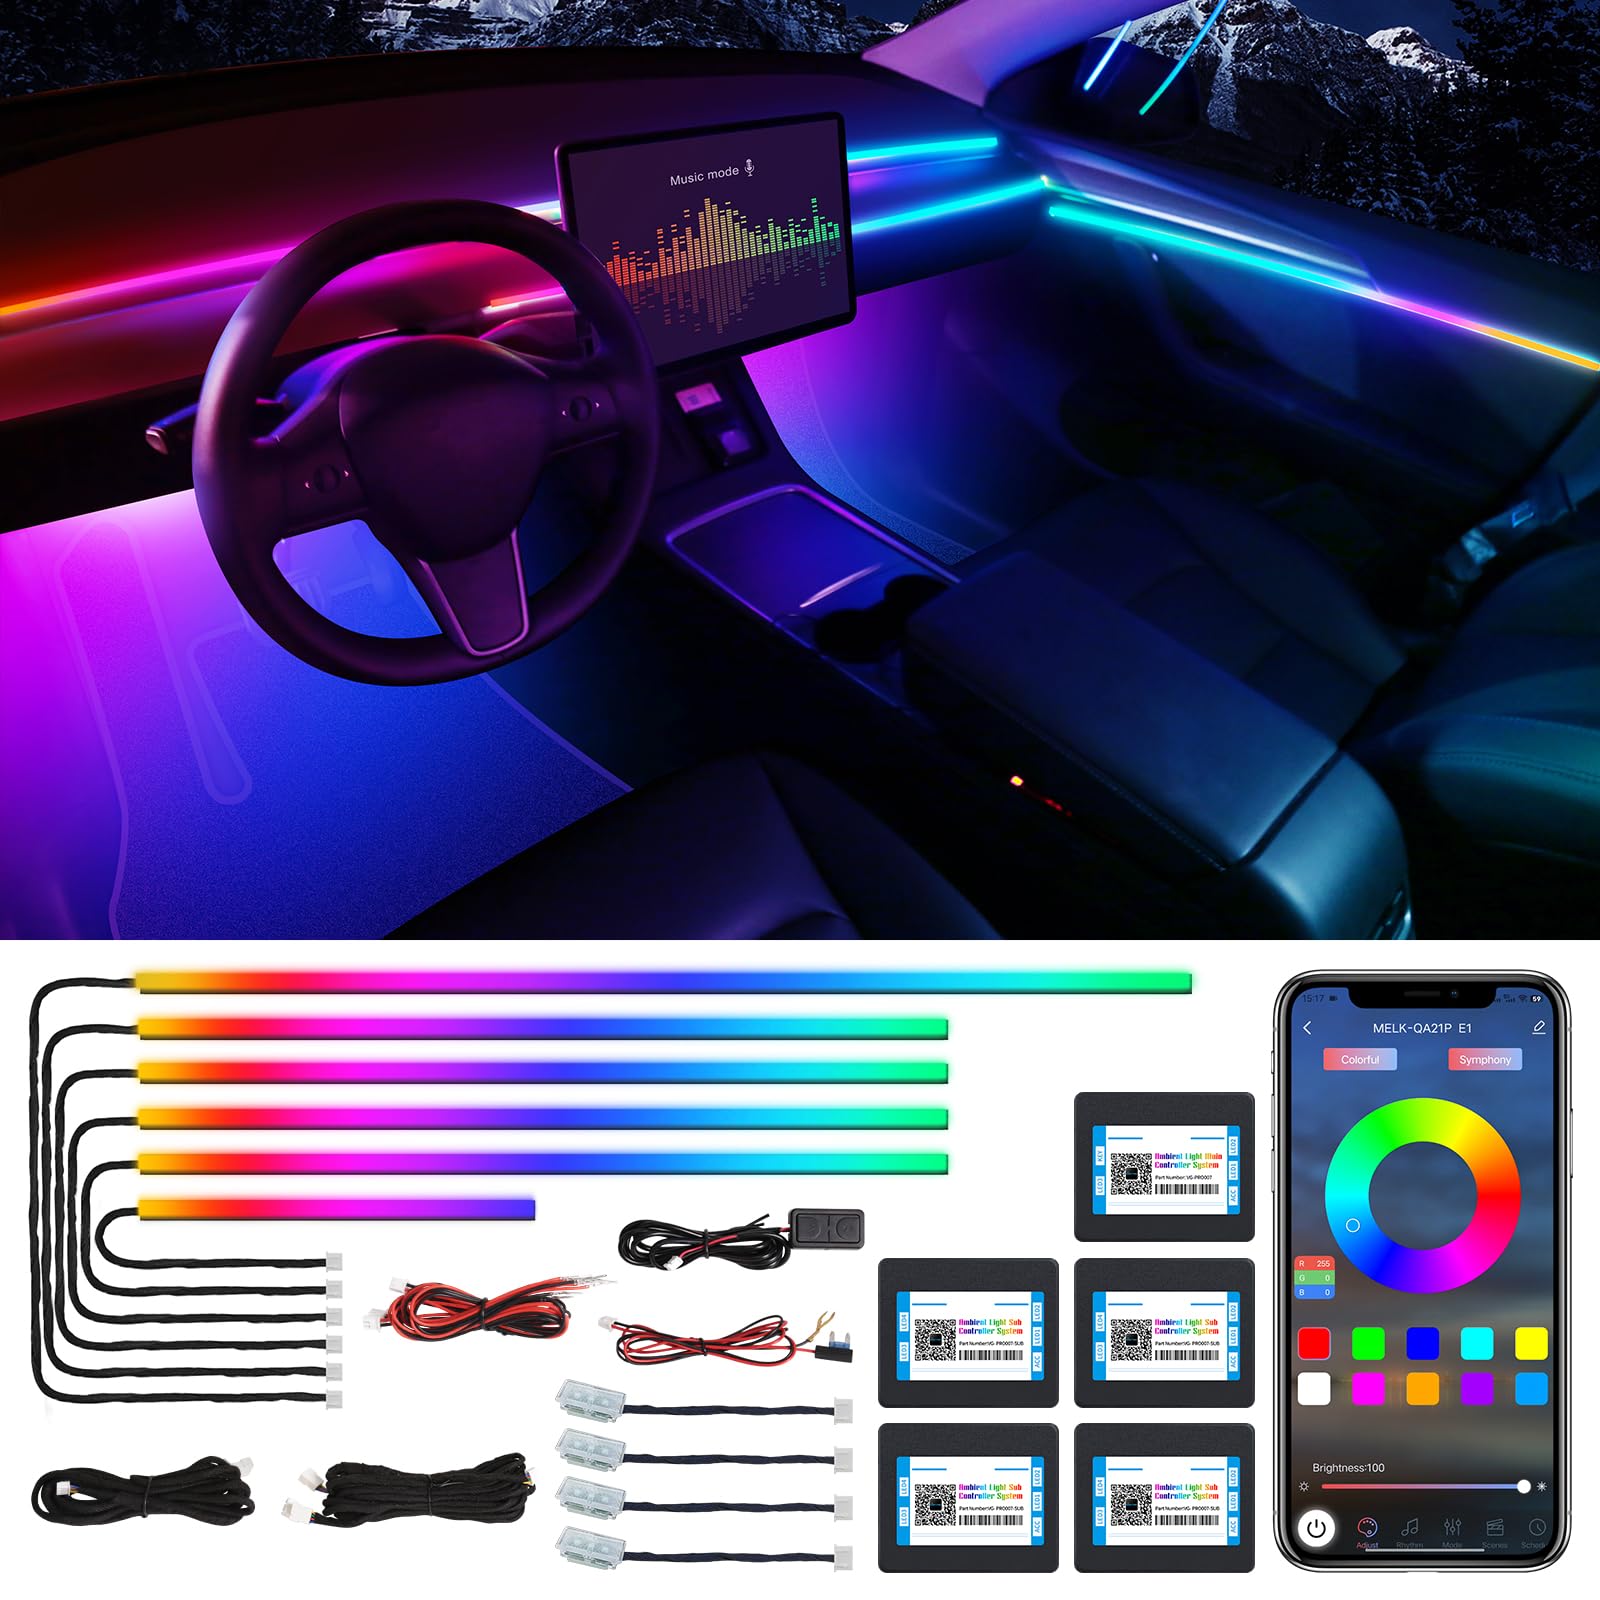 TWETIZ Acrylic Interior Car LED Strip Light with APP, Dreamcolor RGB 10 in 1 with 175 inches 600 LEDs Car Ambient Lighting Kits, Dual Zone LED Strip for Car von TWETIZ